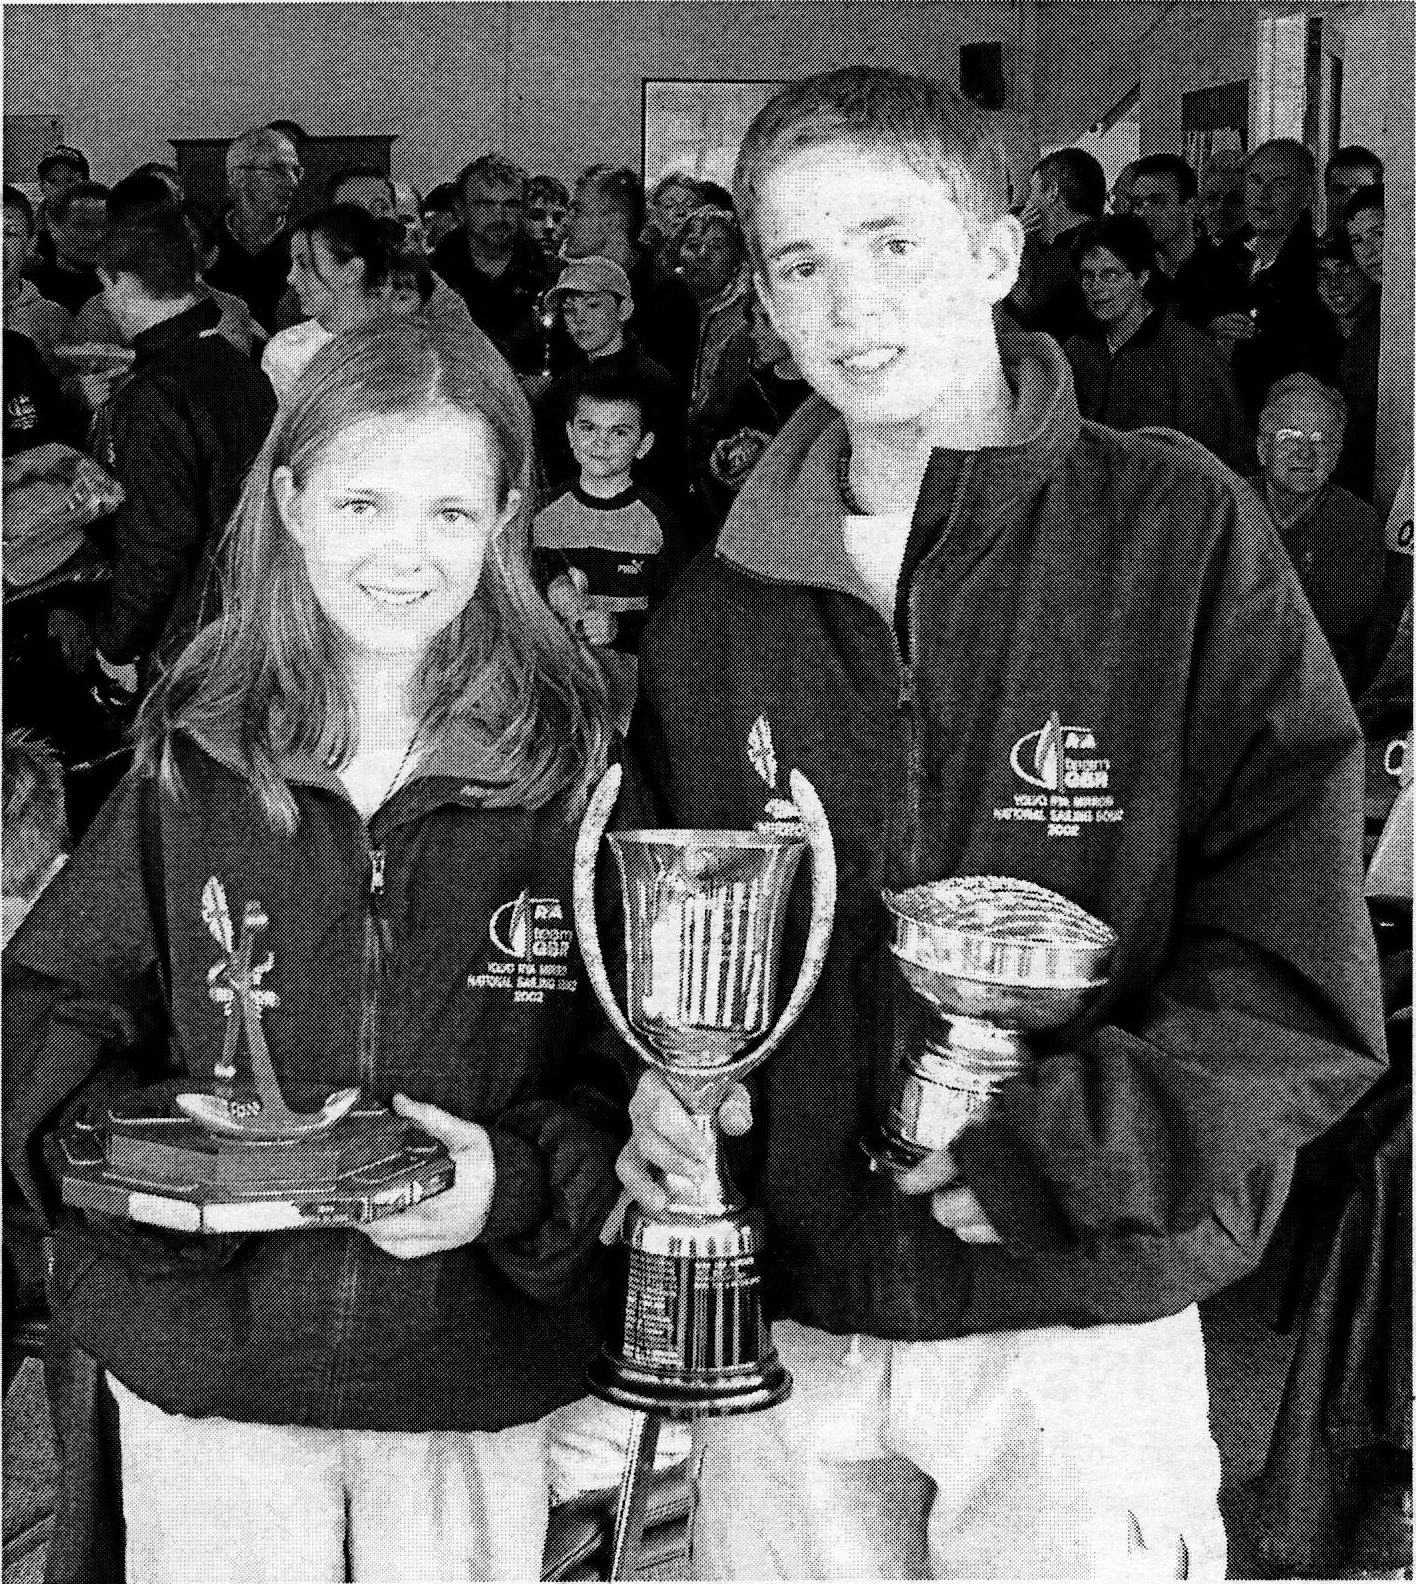 A boy and a girl holding their trophies